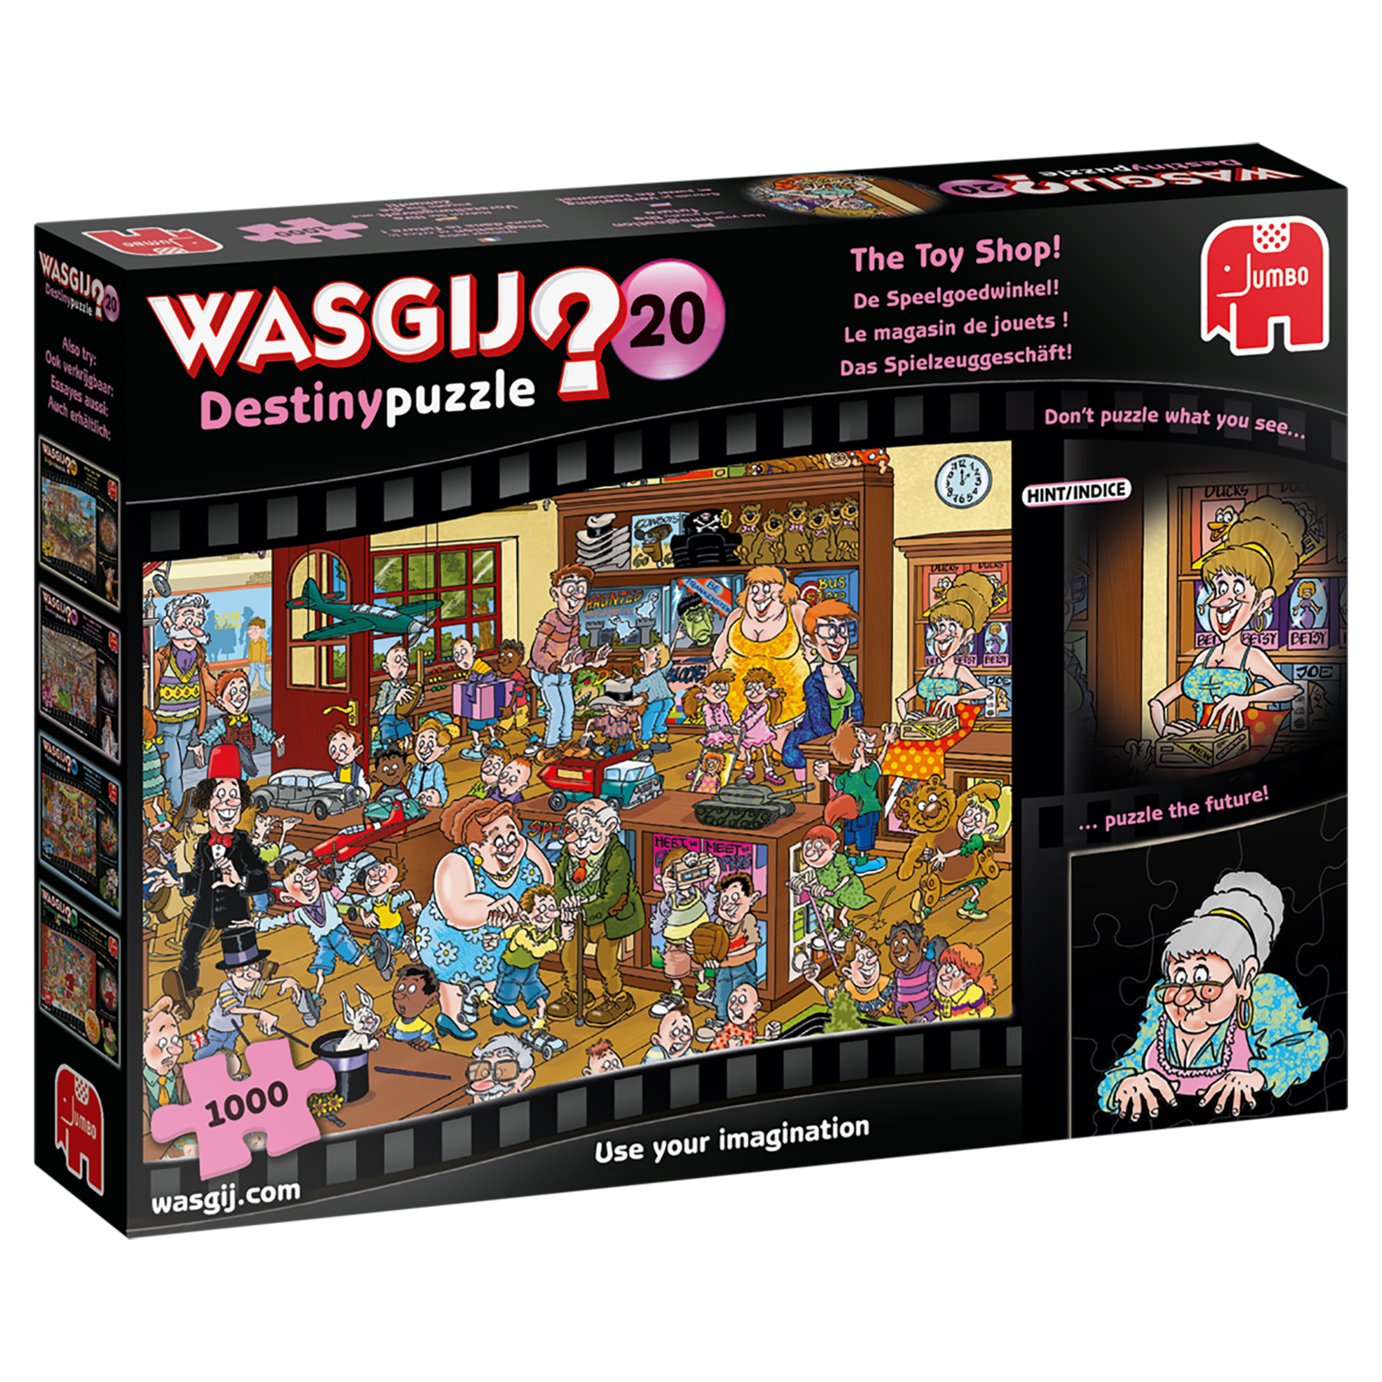 Wasgij Dentiny 20 The Toy Shop Puzzle Review